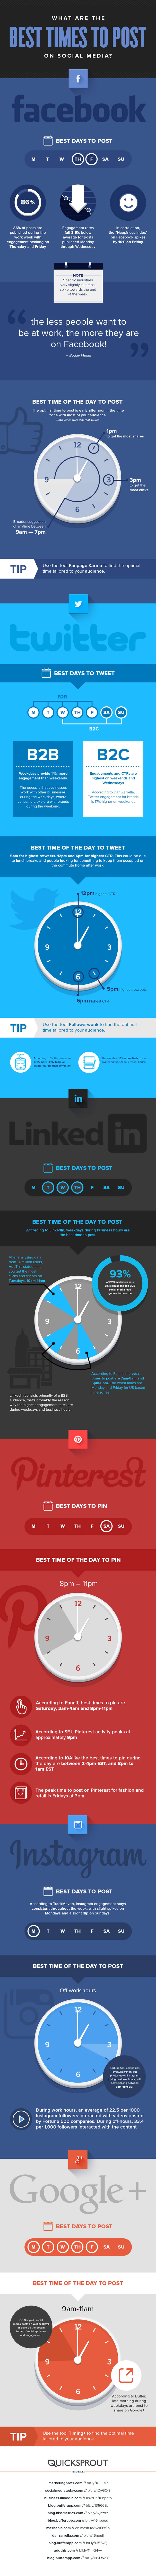 BestTime for Social Media by imorphosis_Infographic